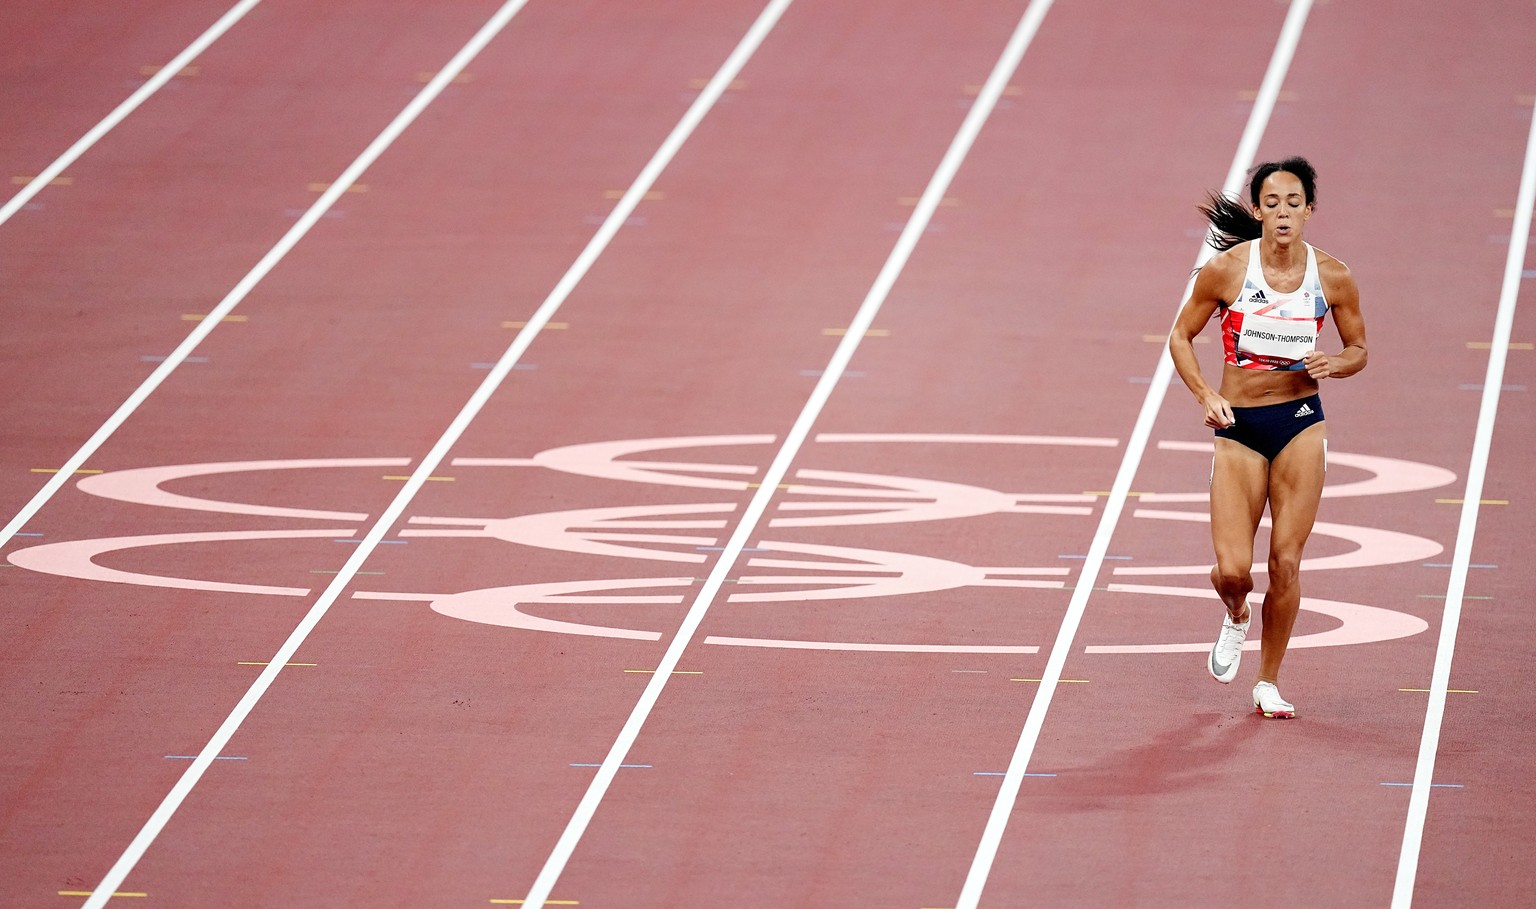 epa09394639 Katarina Johnson-Thompson of Great Britain continues her run after temporarily sitting on the track during her race in the 200m of the Heptathlon during the Athletics events of the Tokyo 2 ...